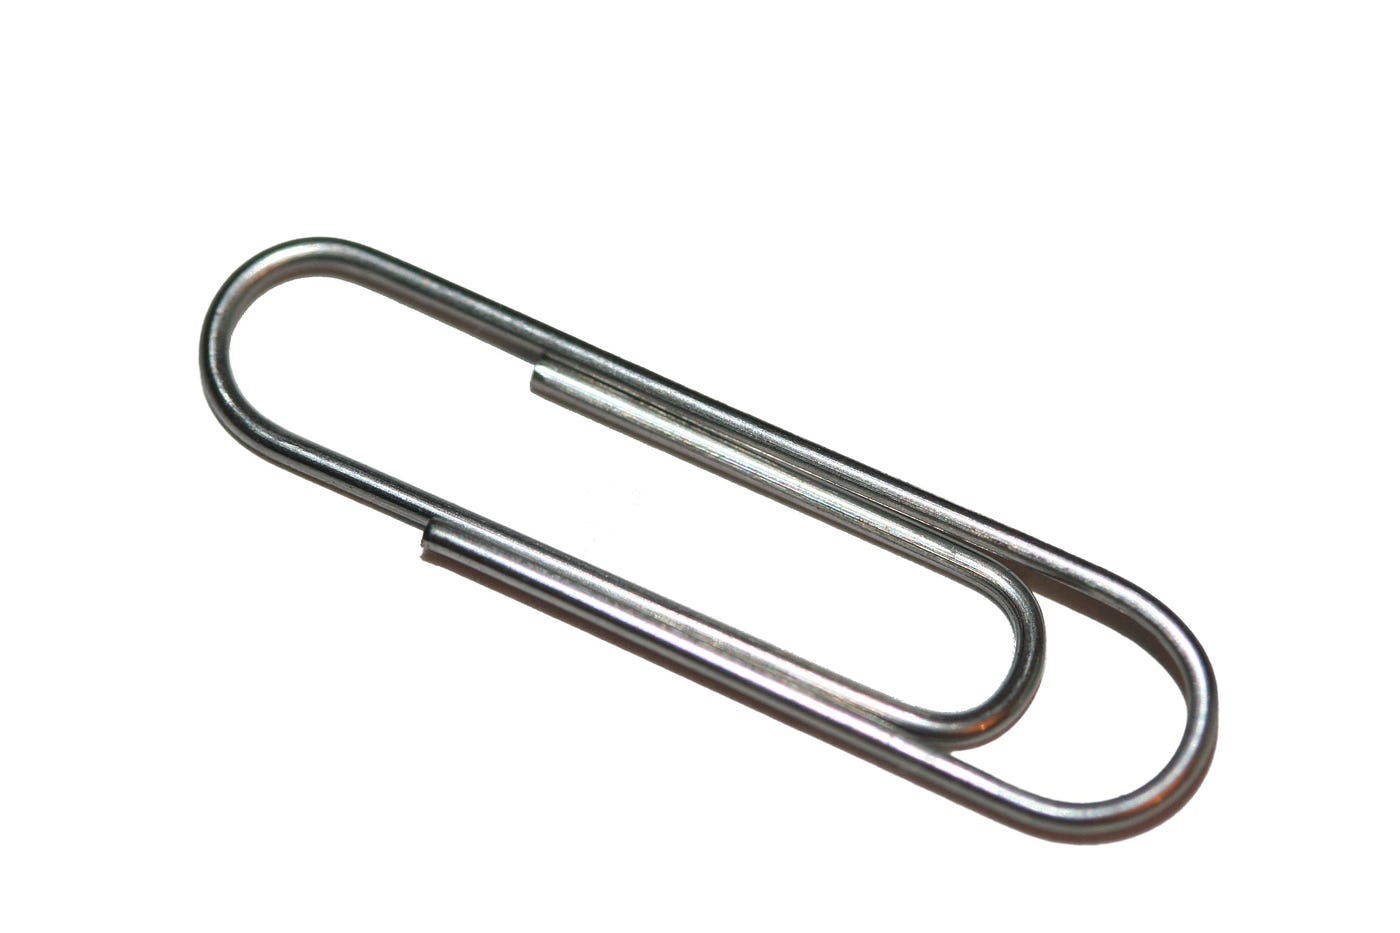 The History and Invention of the Paperclip